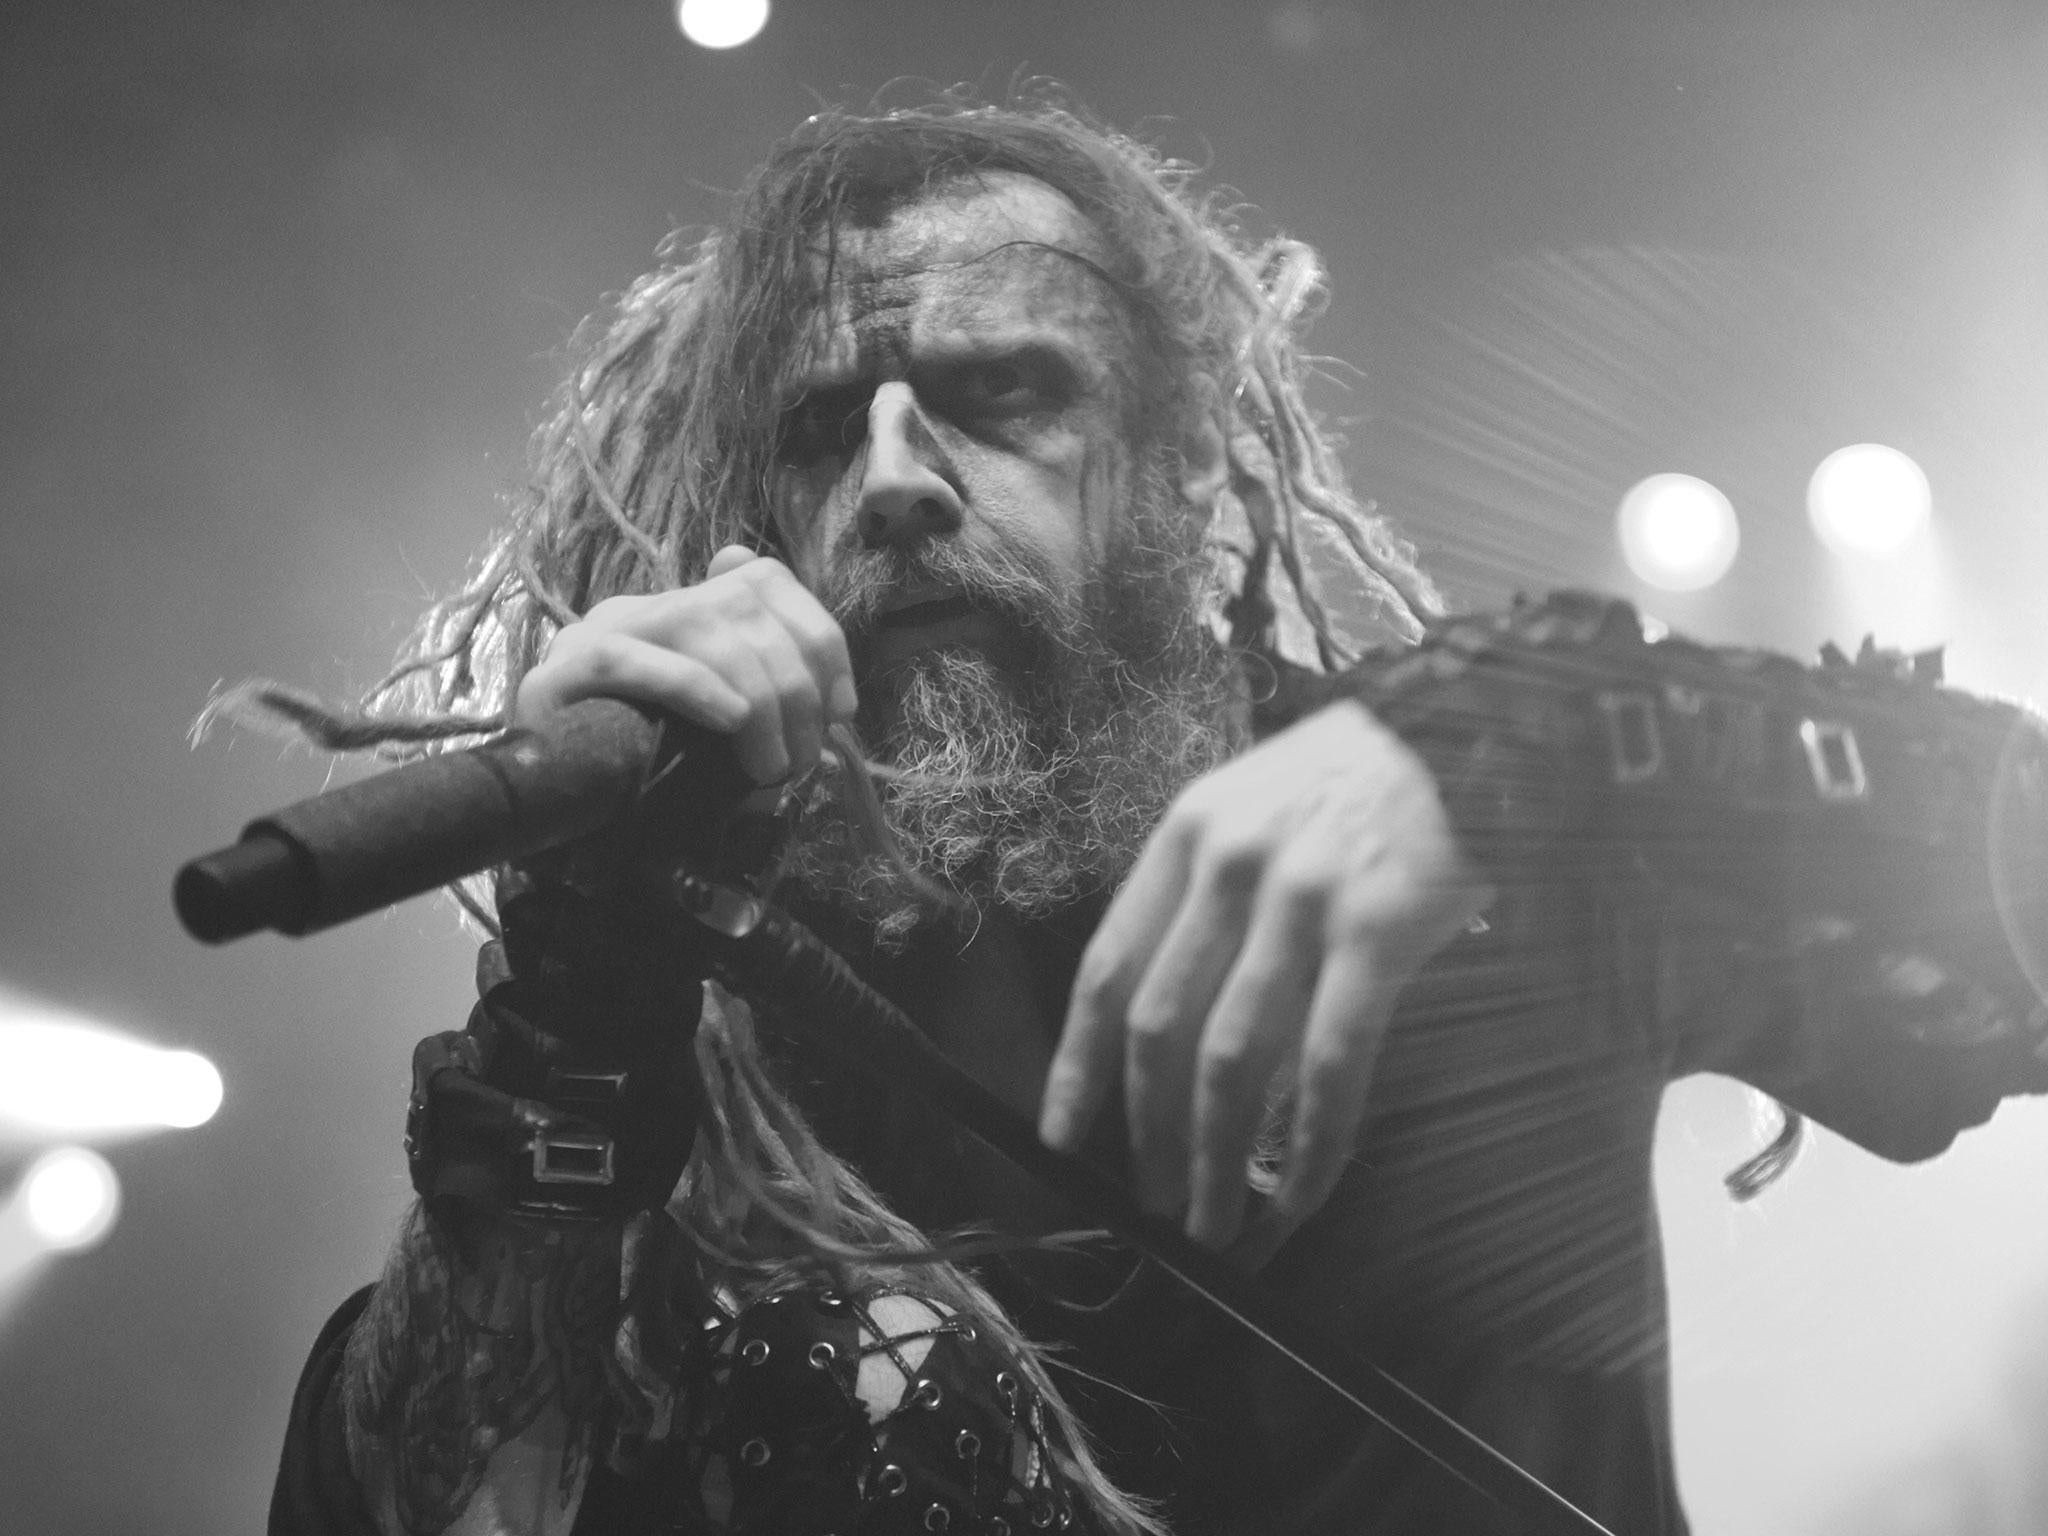 Rob Zombie performs at the Kentish Town Forum, London, 17th October 2016